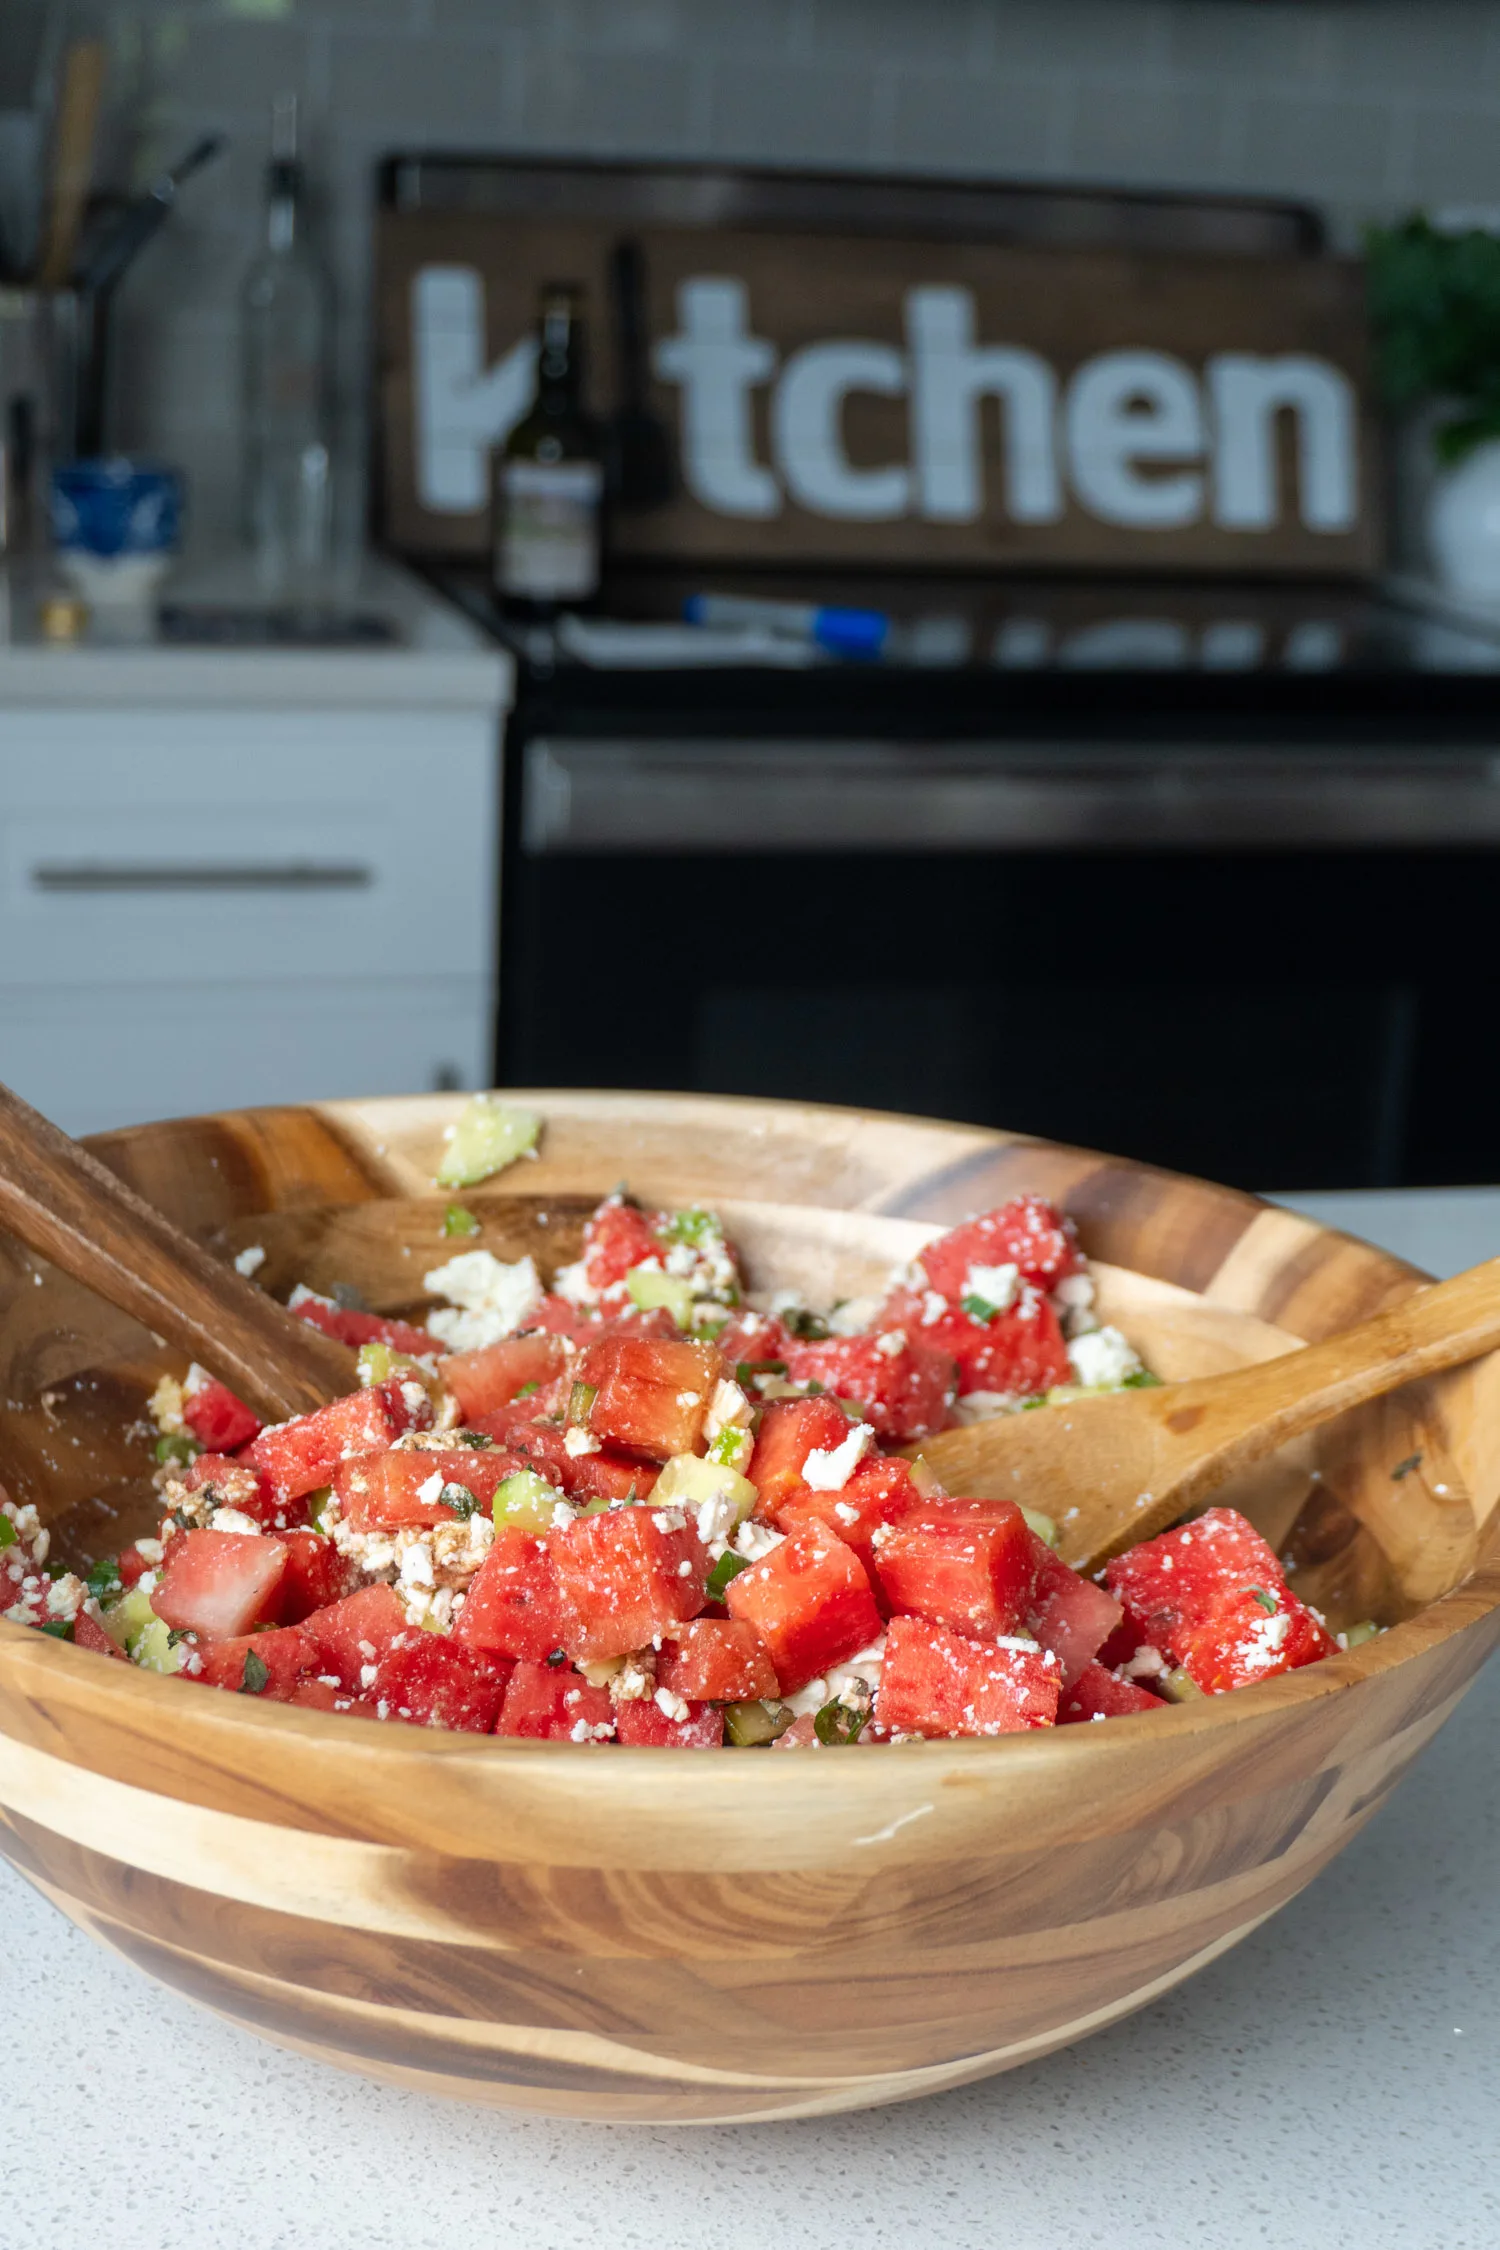 A bowl of watermelon salad on a countertop in the test kitchen